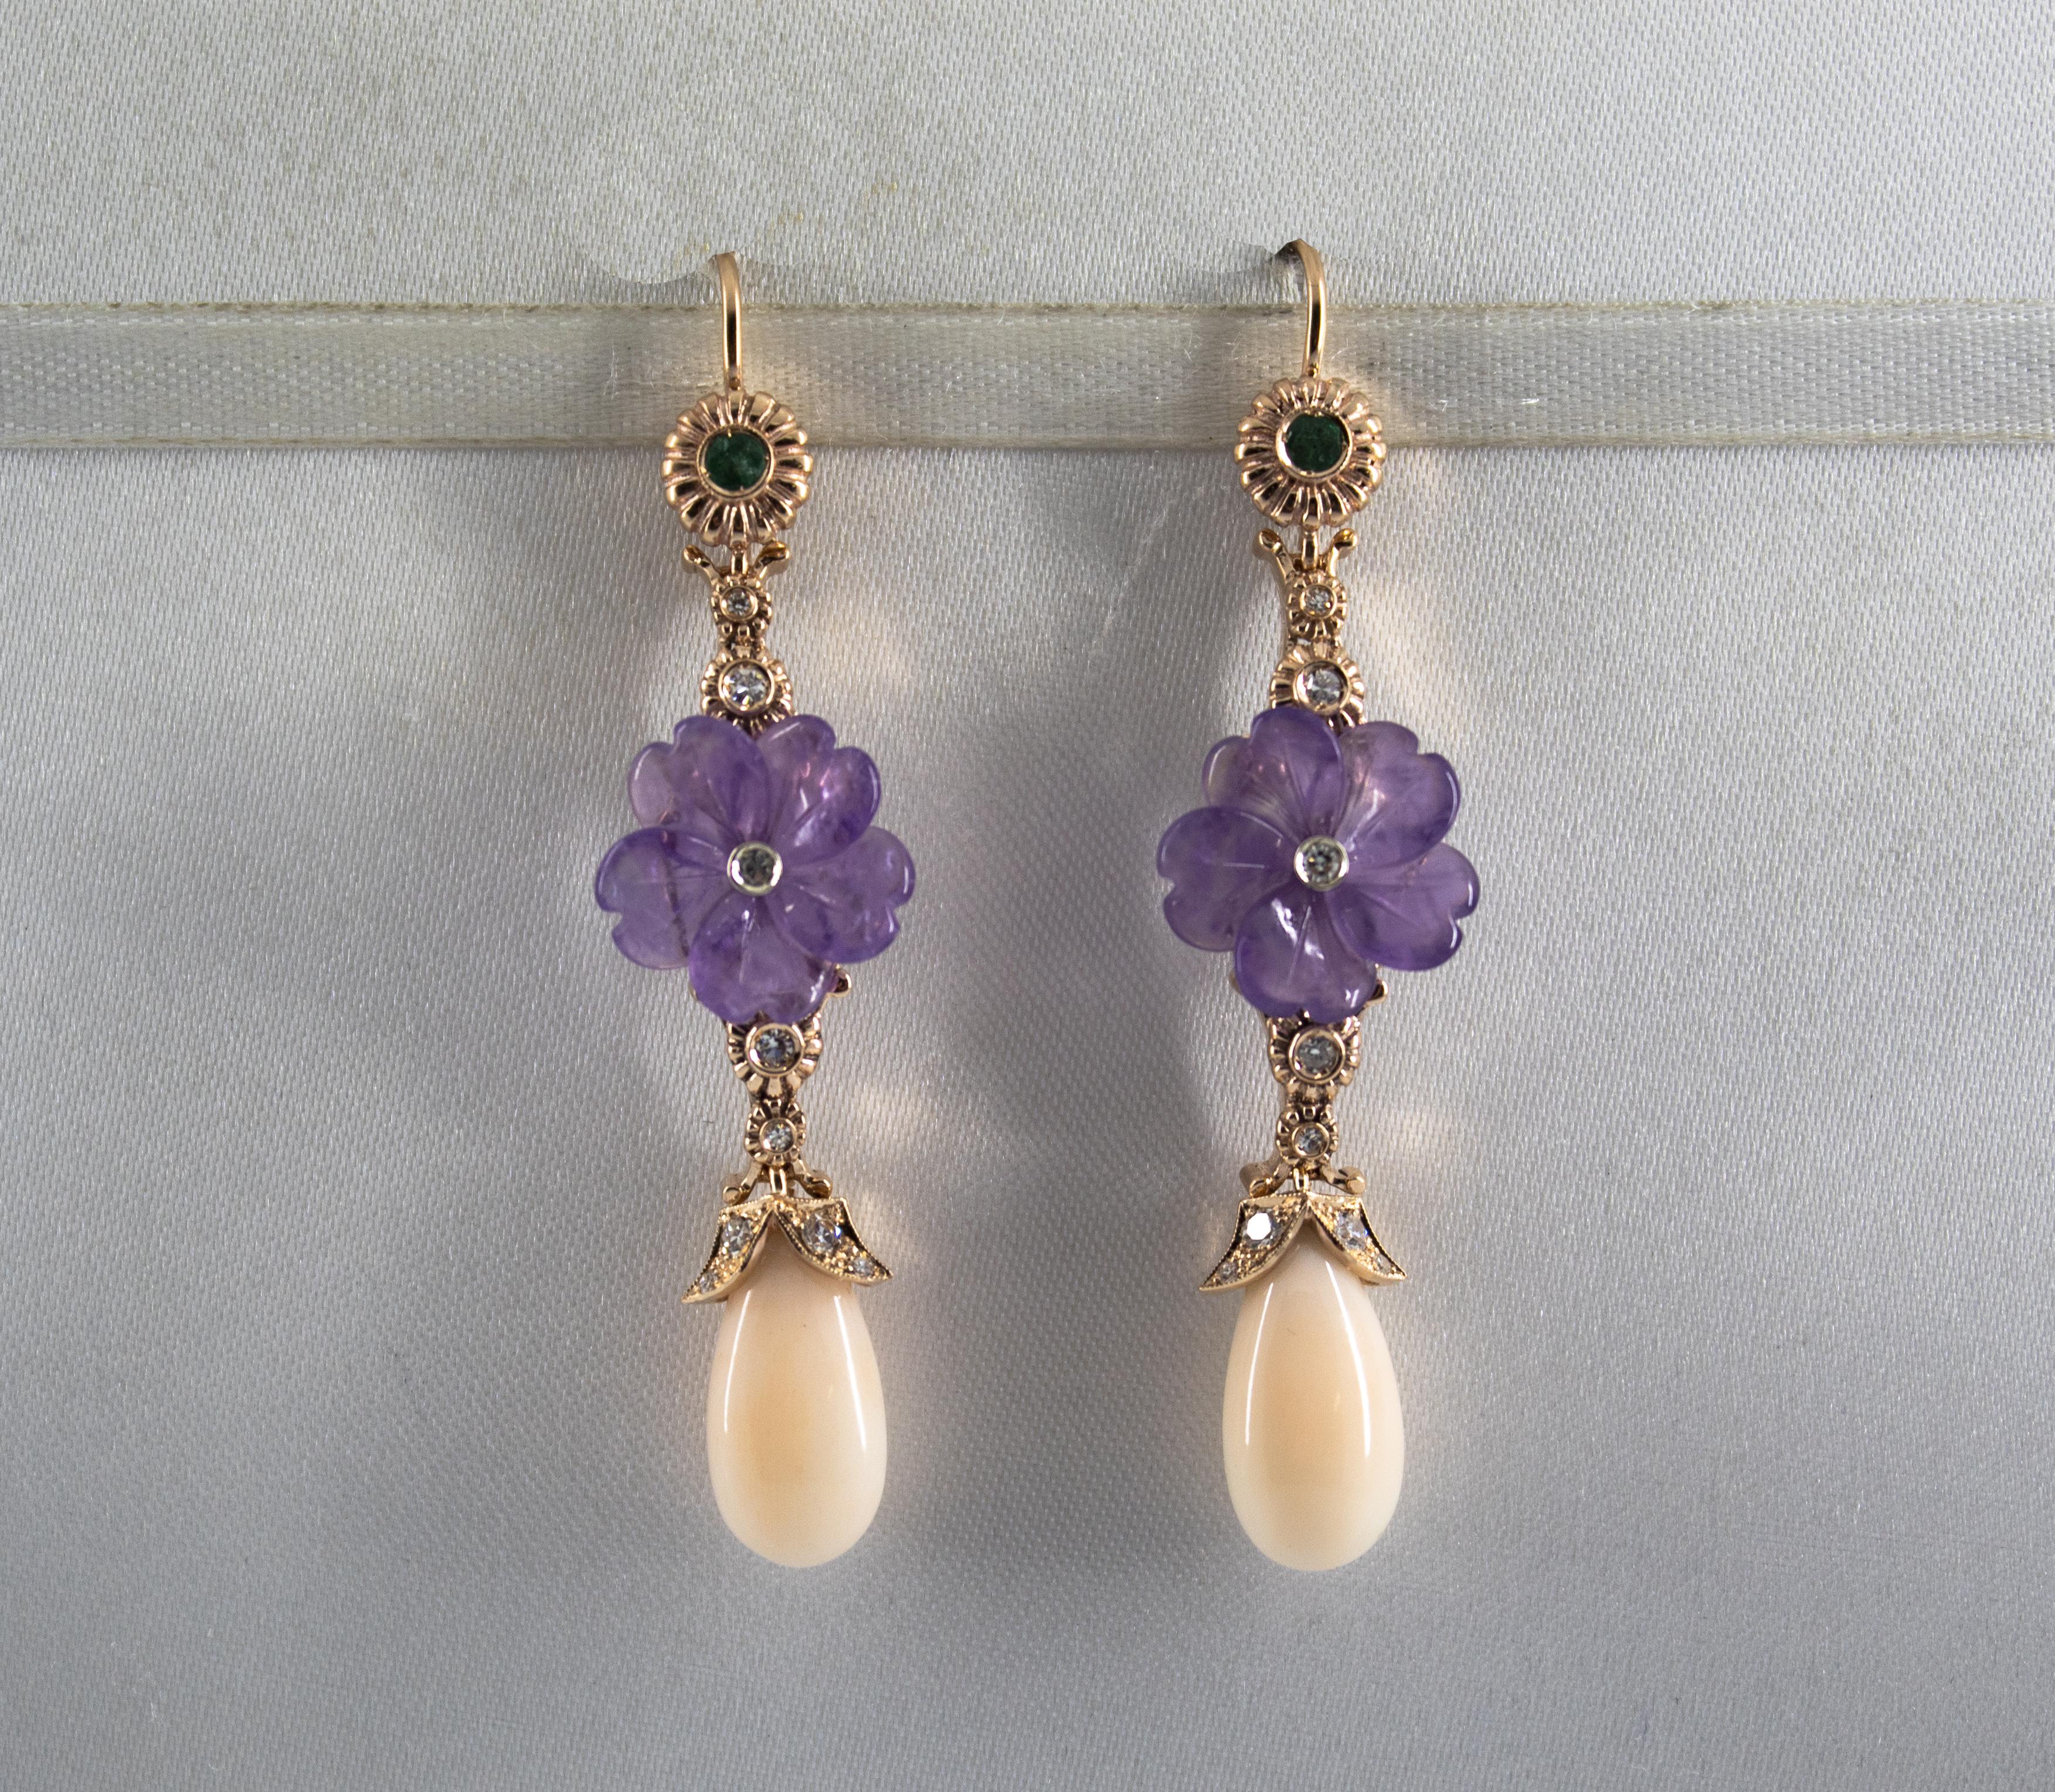 These Stud Earrings are made of 14K Yellow Gold.
These Earrings have 0.35 Carats of White Brilliant Cut Diamonds.
These Earrings have 0.10 Carats of Emeralds.
These Earrings have also Pink Coral and Amethyst.

All our Earrings have pins for pierced